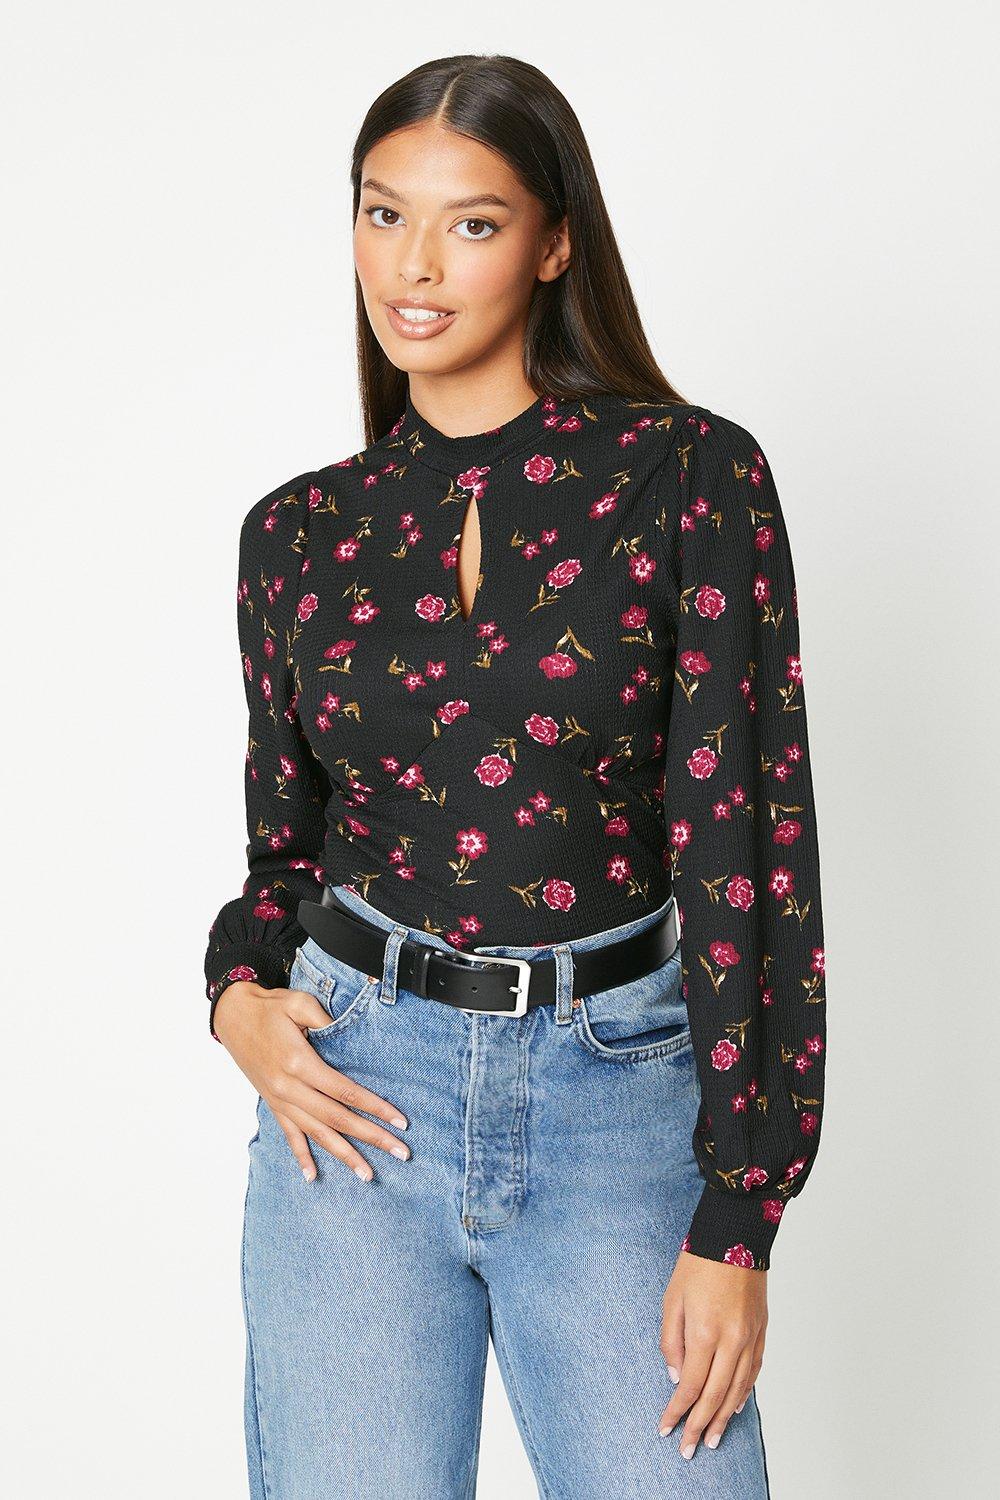 Women’s Red Floral Keyhole Detail Long Sleeve Top - black - XL